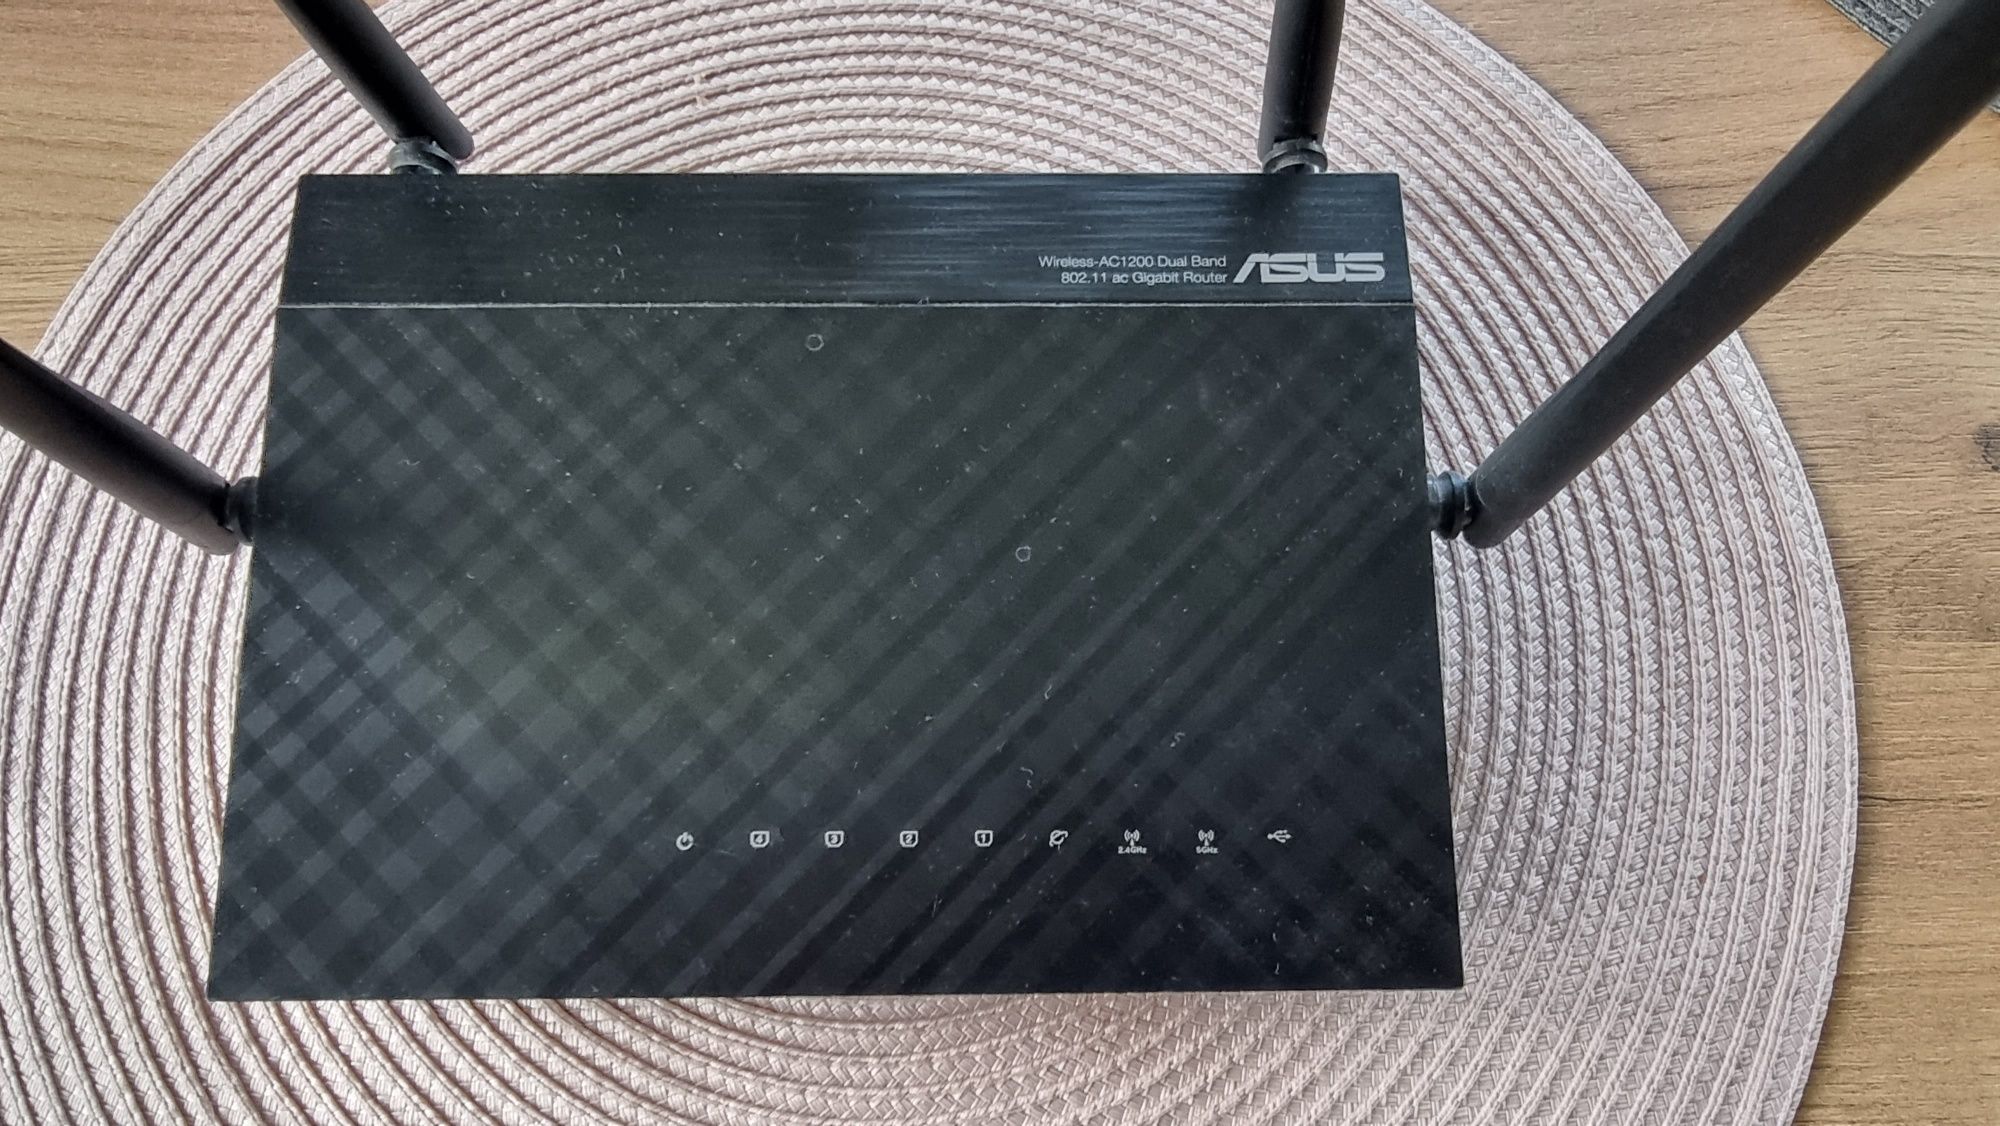 Asus Wireless-AC1200 Dual Band

802.11 ac Gigabit Router